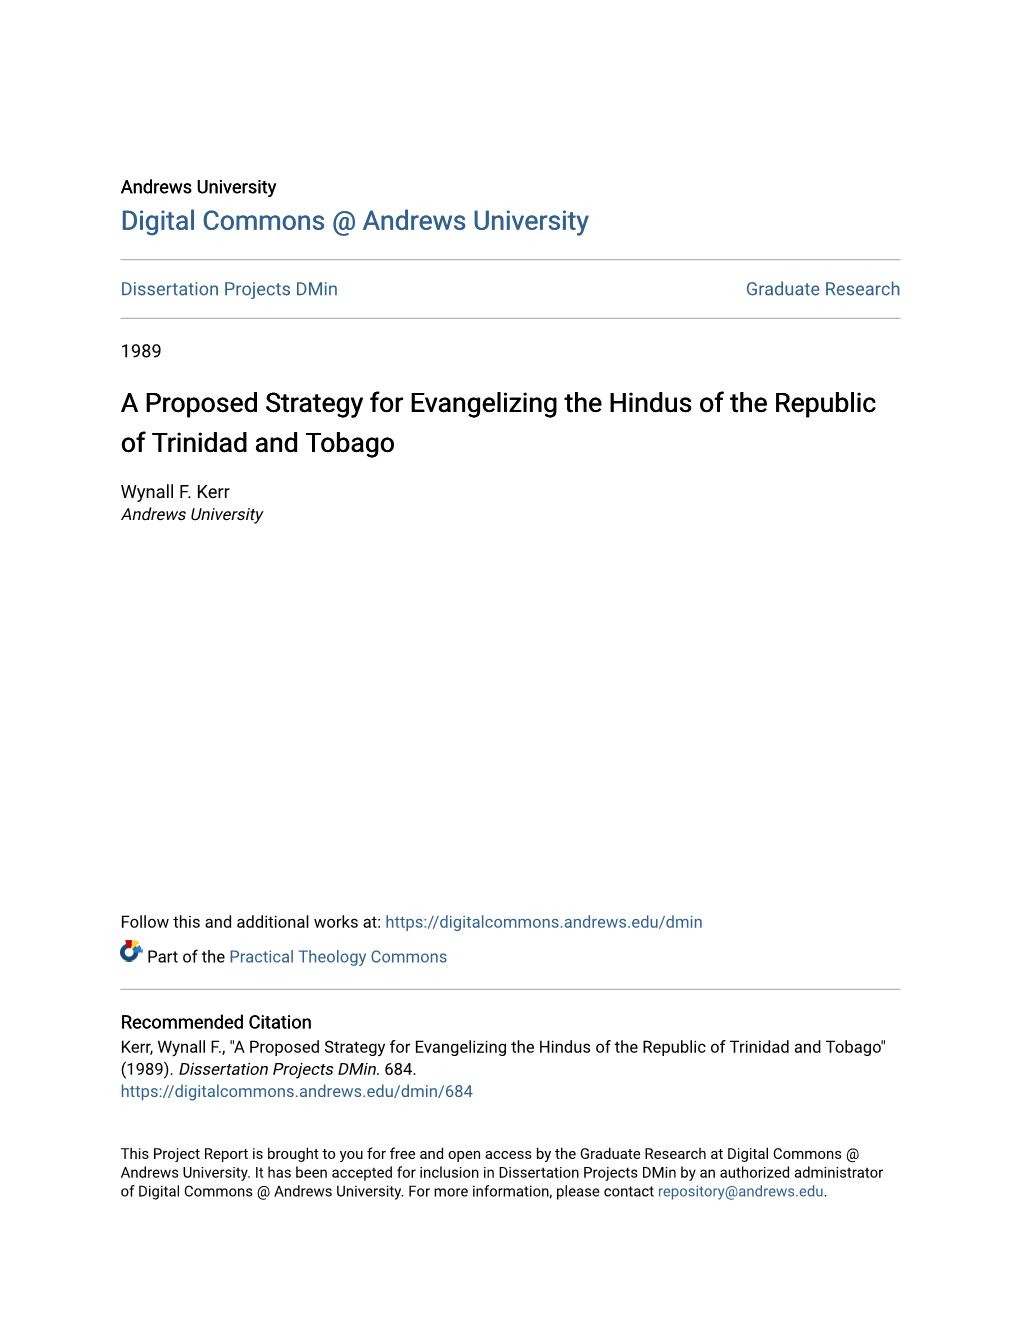 A Proposed Strategy for Evangelizing the Hindus of the Republic of Trinidad and Tobago